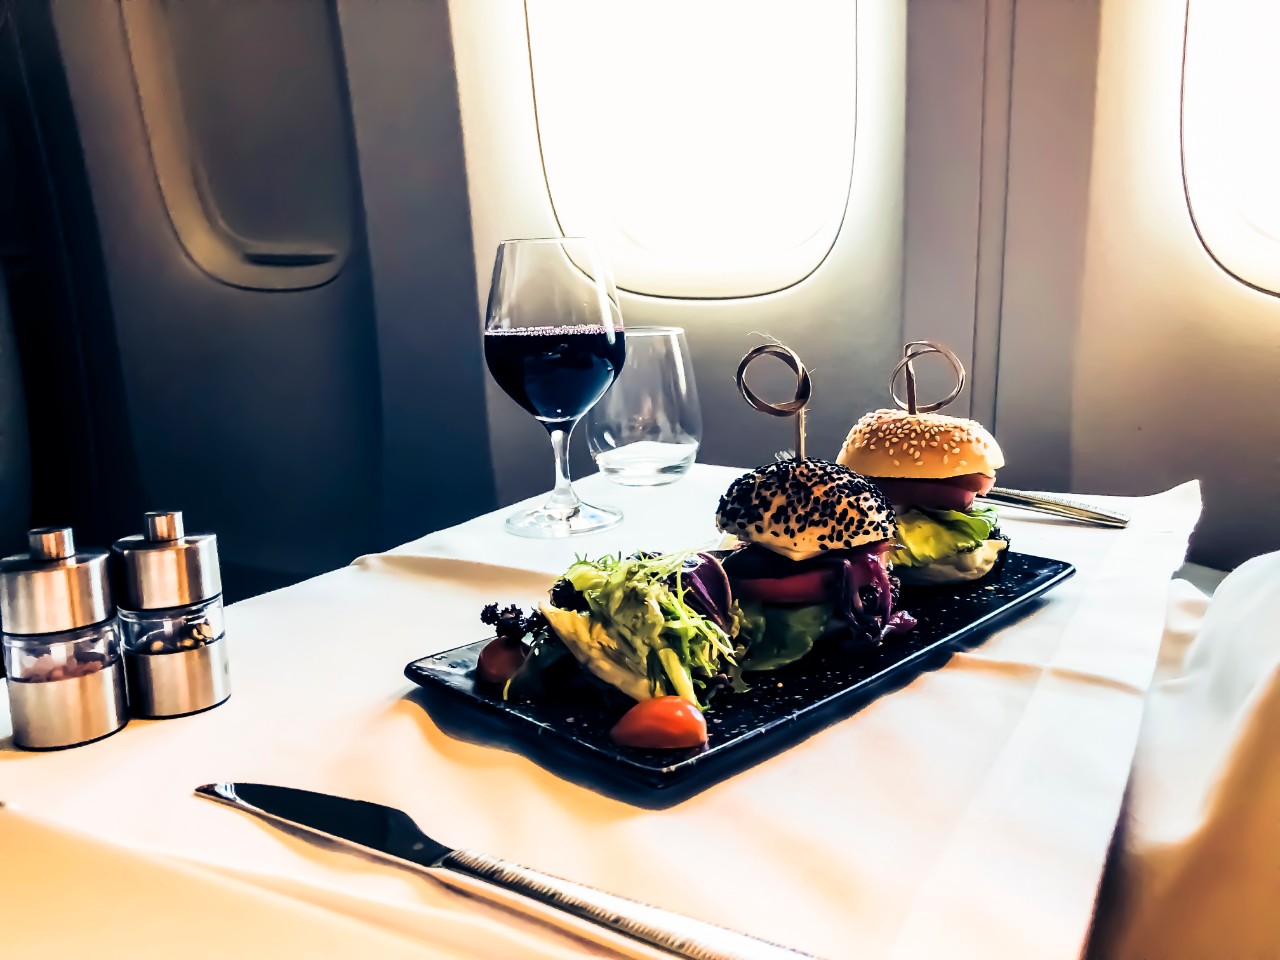 Luxury food served on an aircraft with a glass of wine and metal cutlery 